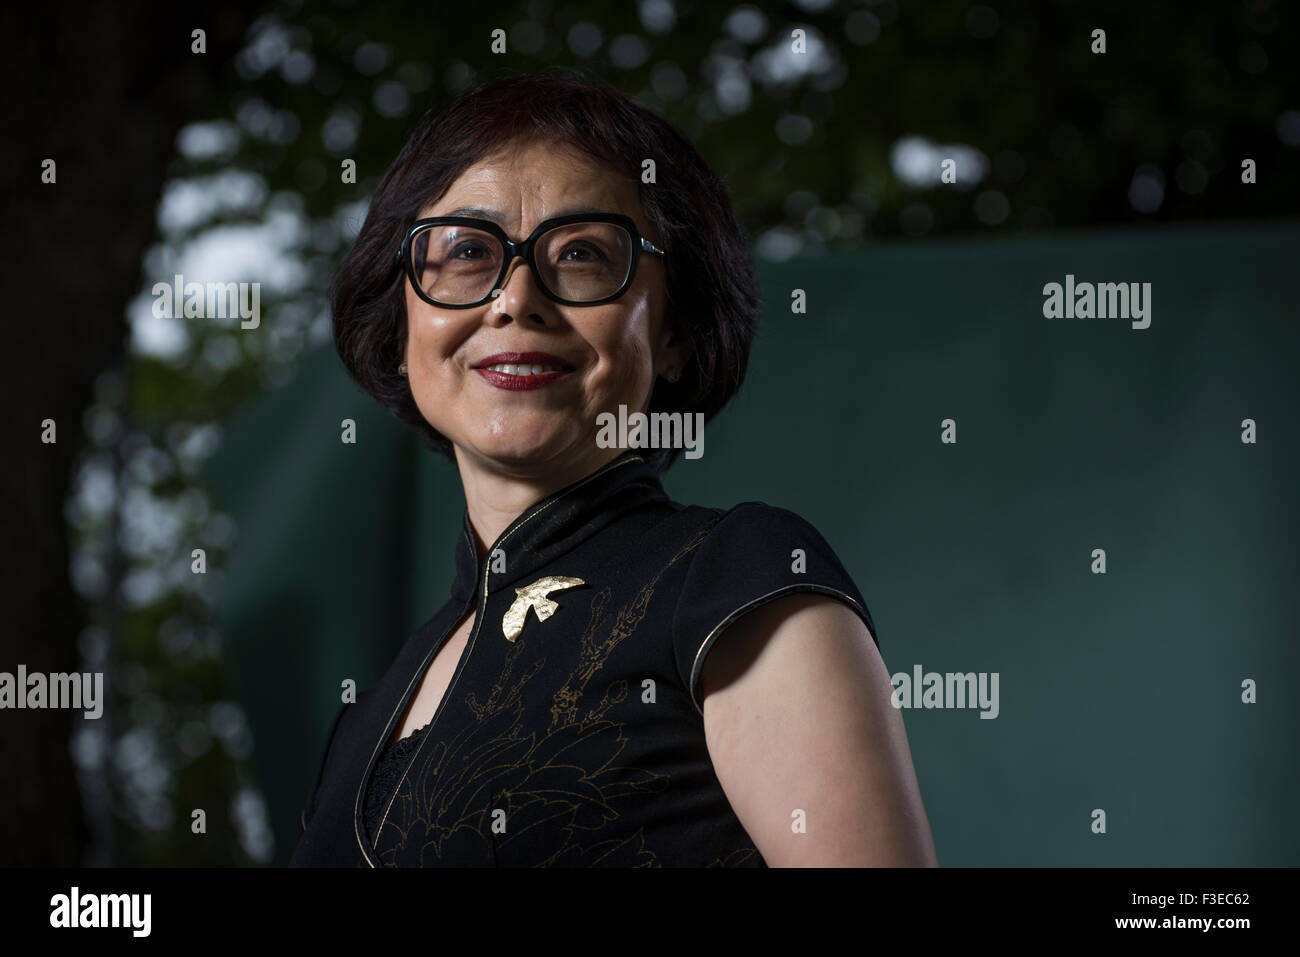 British-Chinese journalist, author, speaker, and advocate for women's issues Xinran. Stock Photo